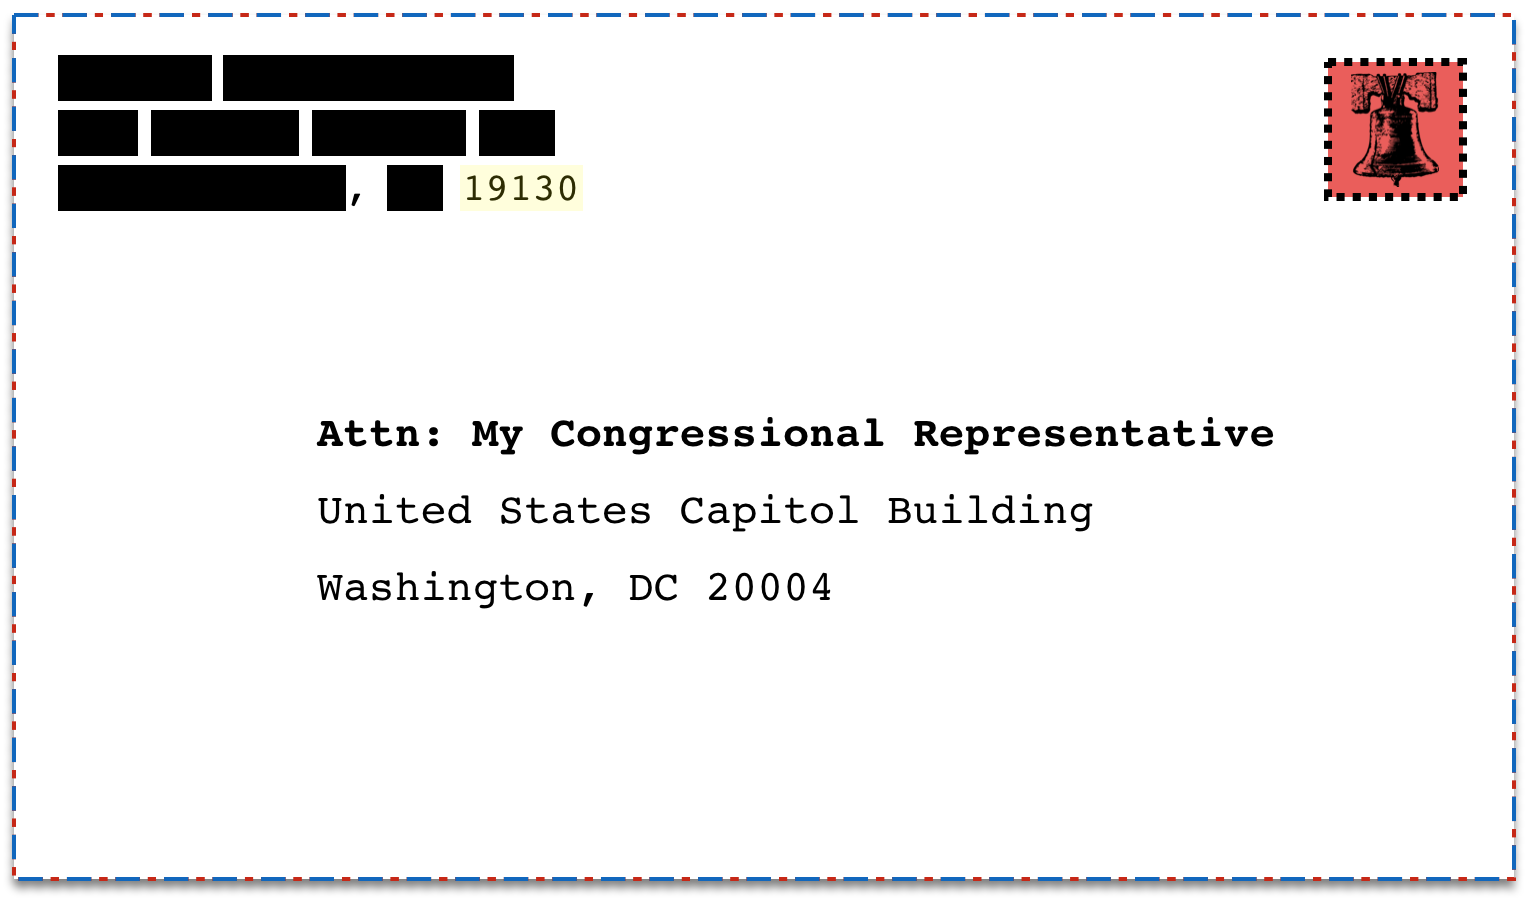 match constituent to representative with only a ZIP code